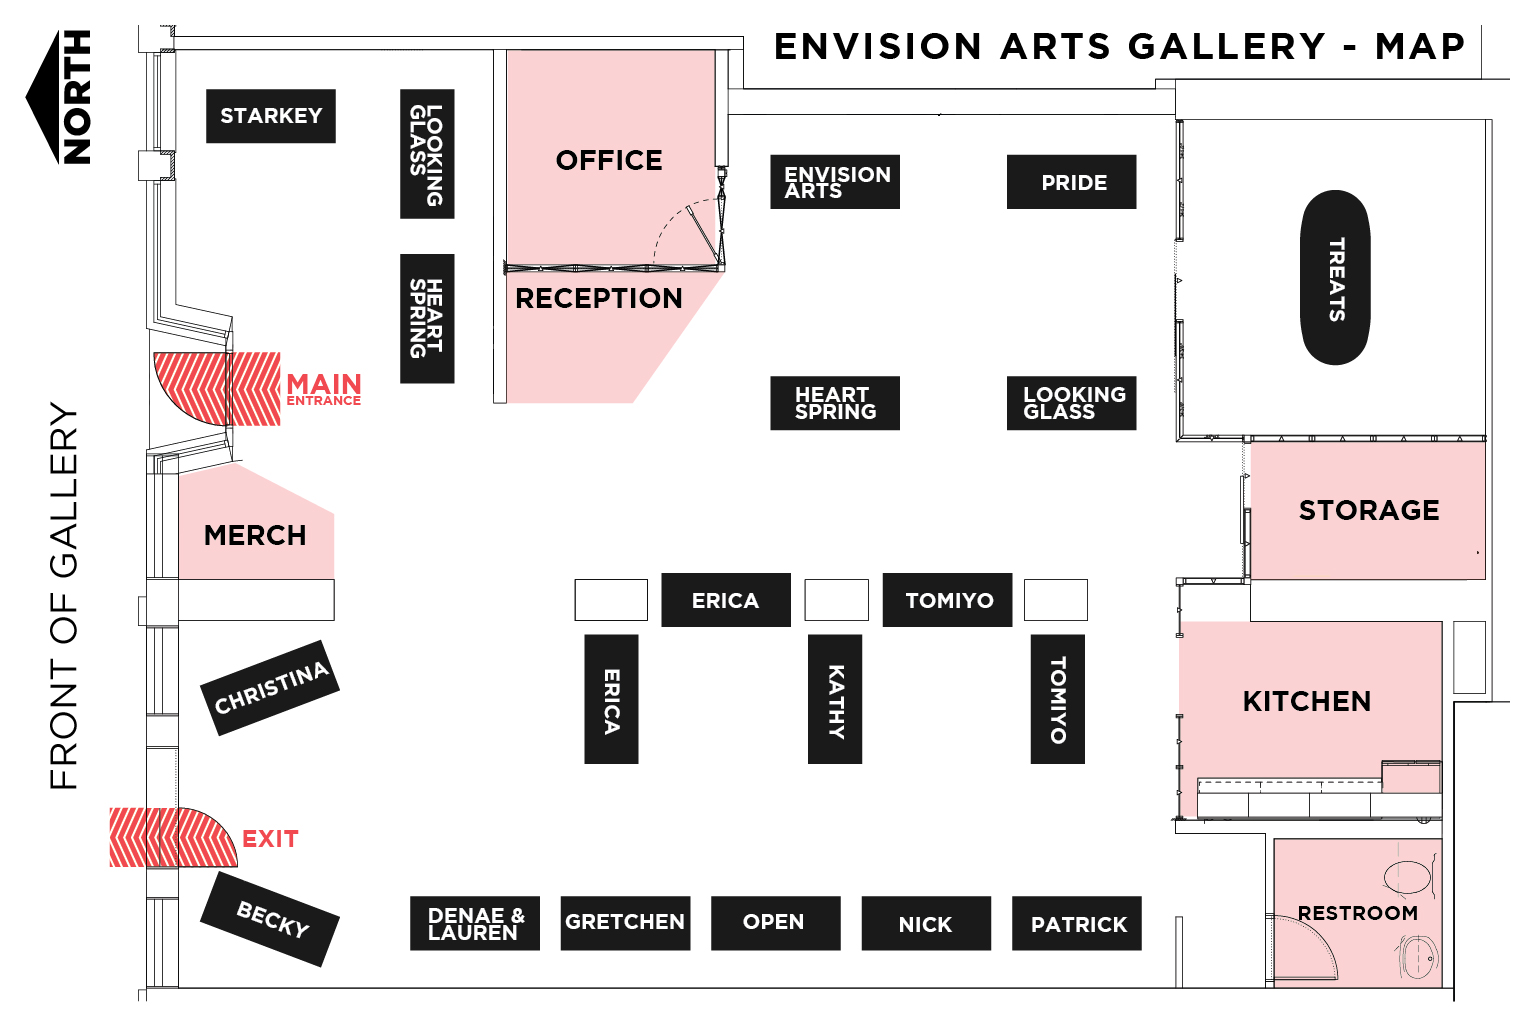 Envision Arts Gallery HOLIDAY-ART-AND-CRAFT-MARKET-GALLERY-MAP.jpg